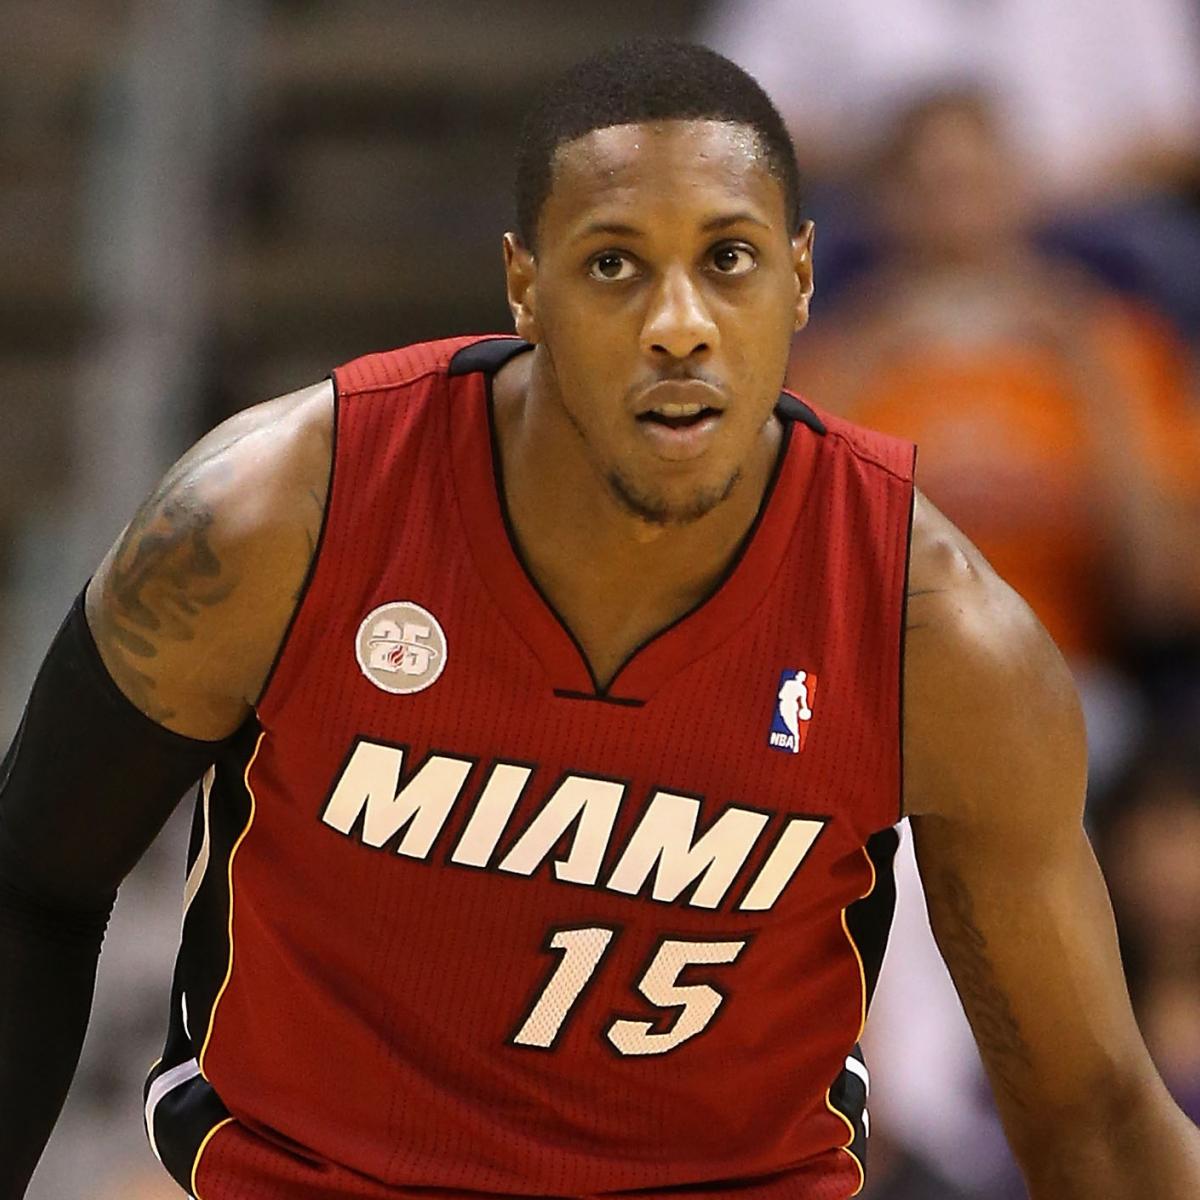 Miami Heat sharpshooter Mario Chalmers is often inconsistent, but